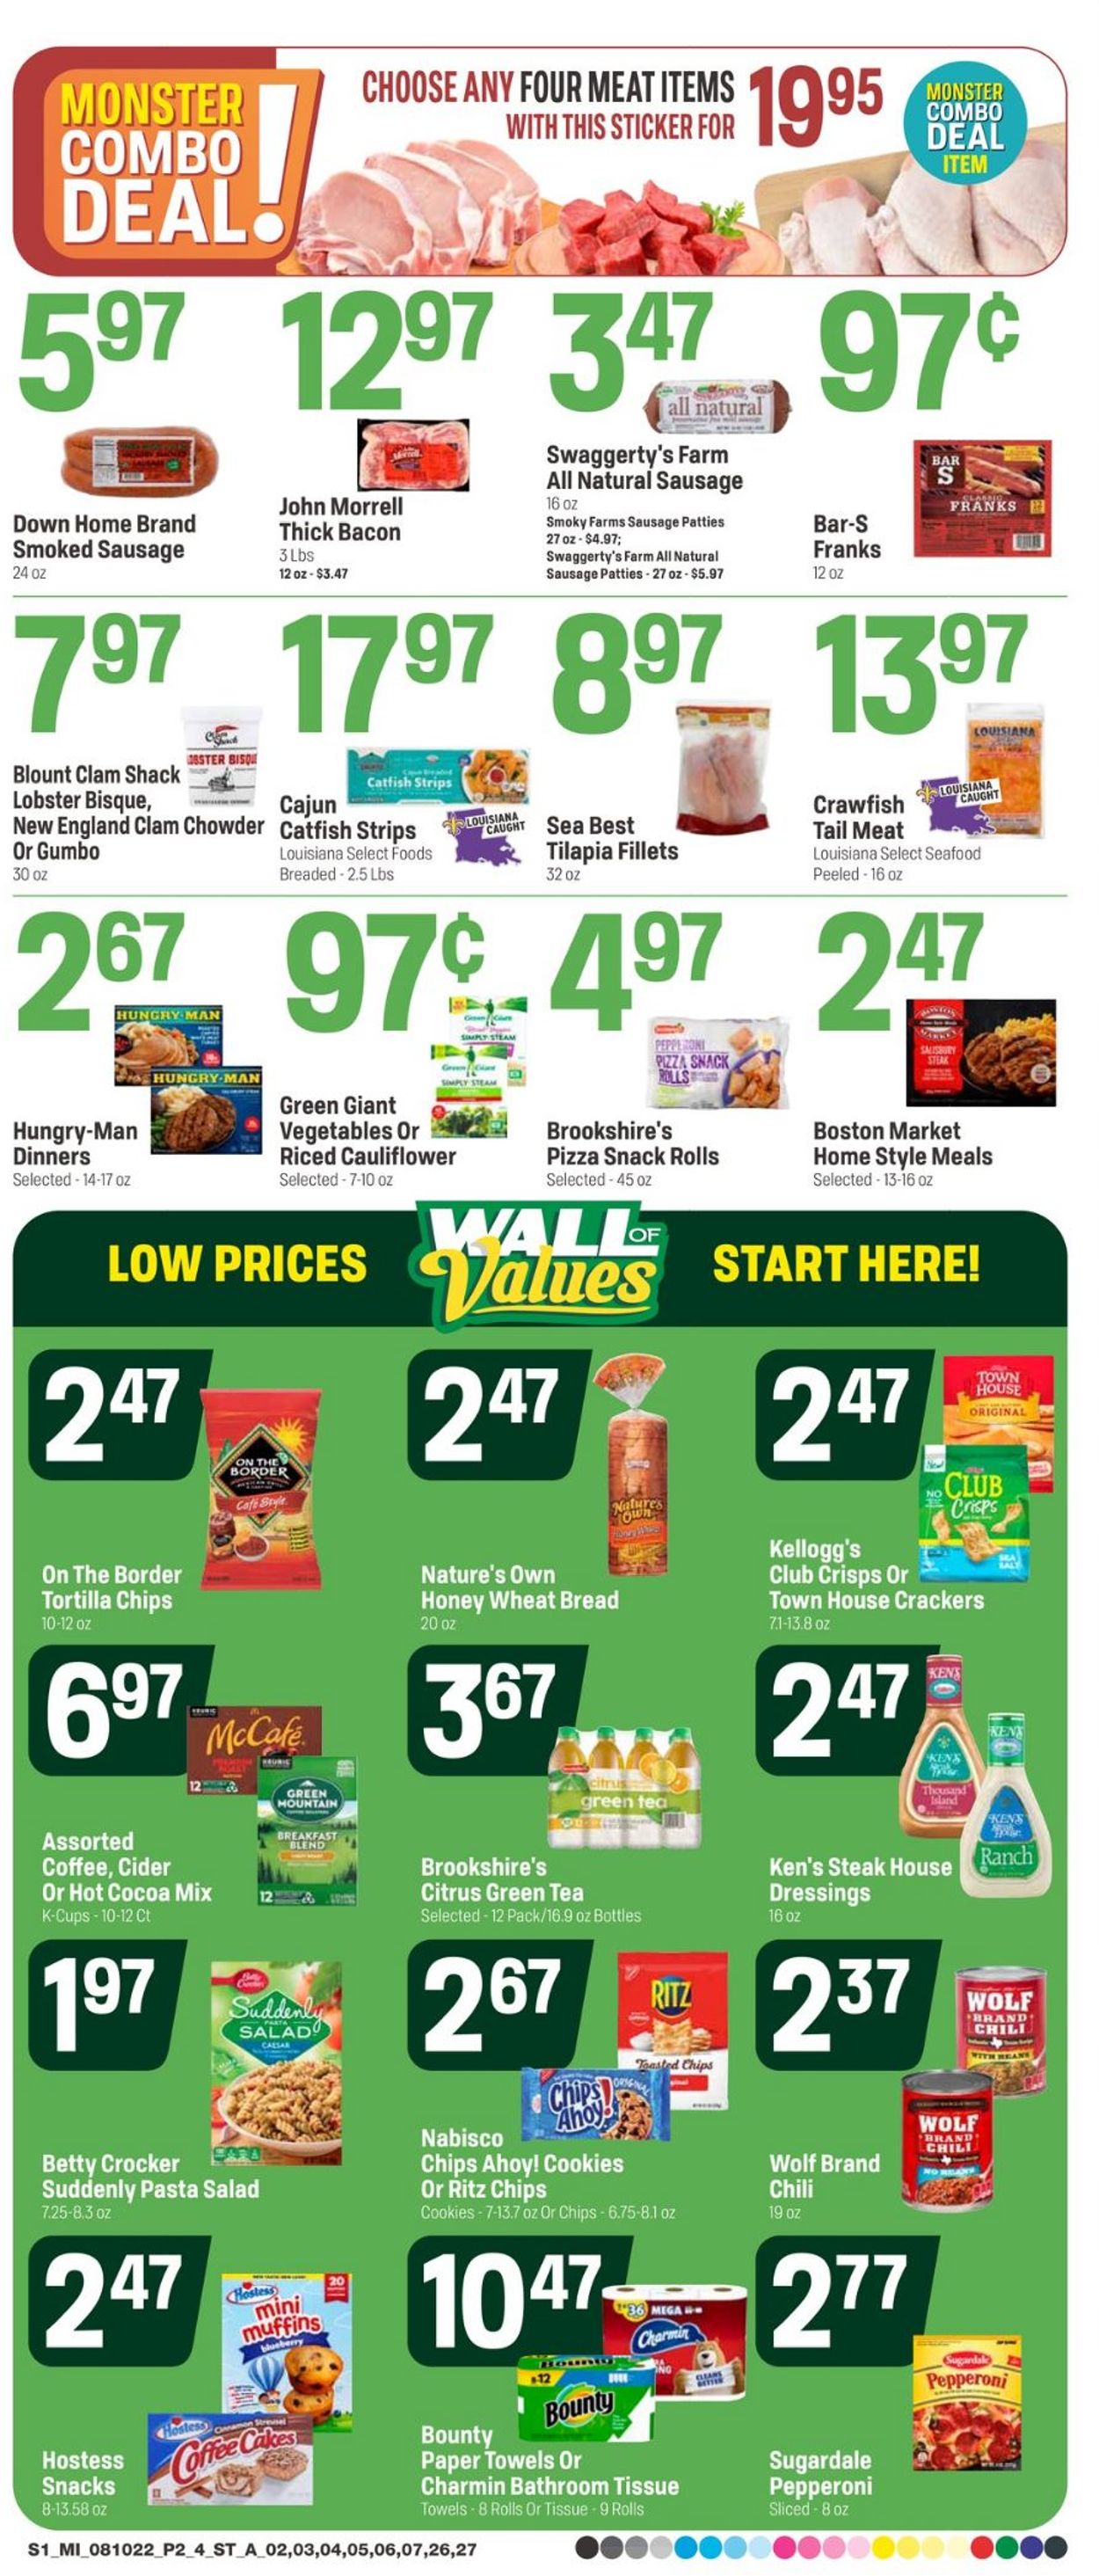 Catalogue Super 1 Foods from 08/10/2022